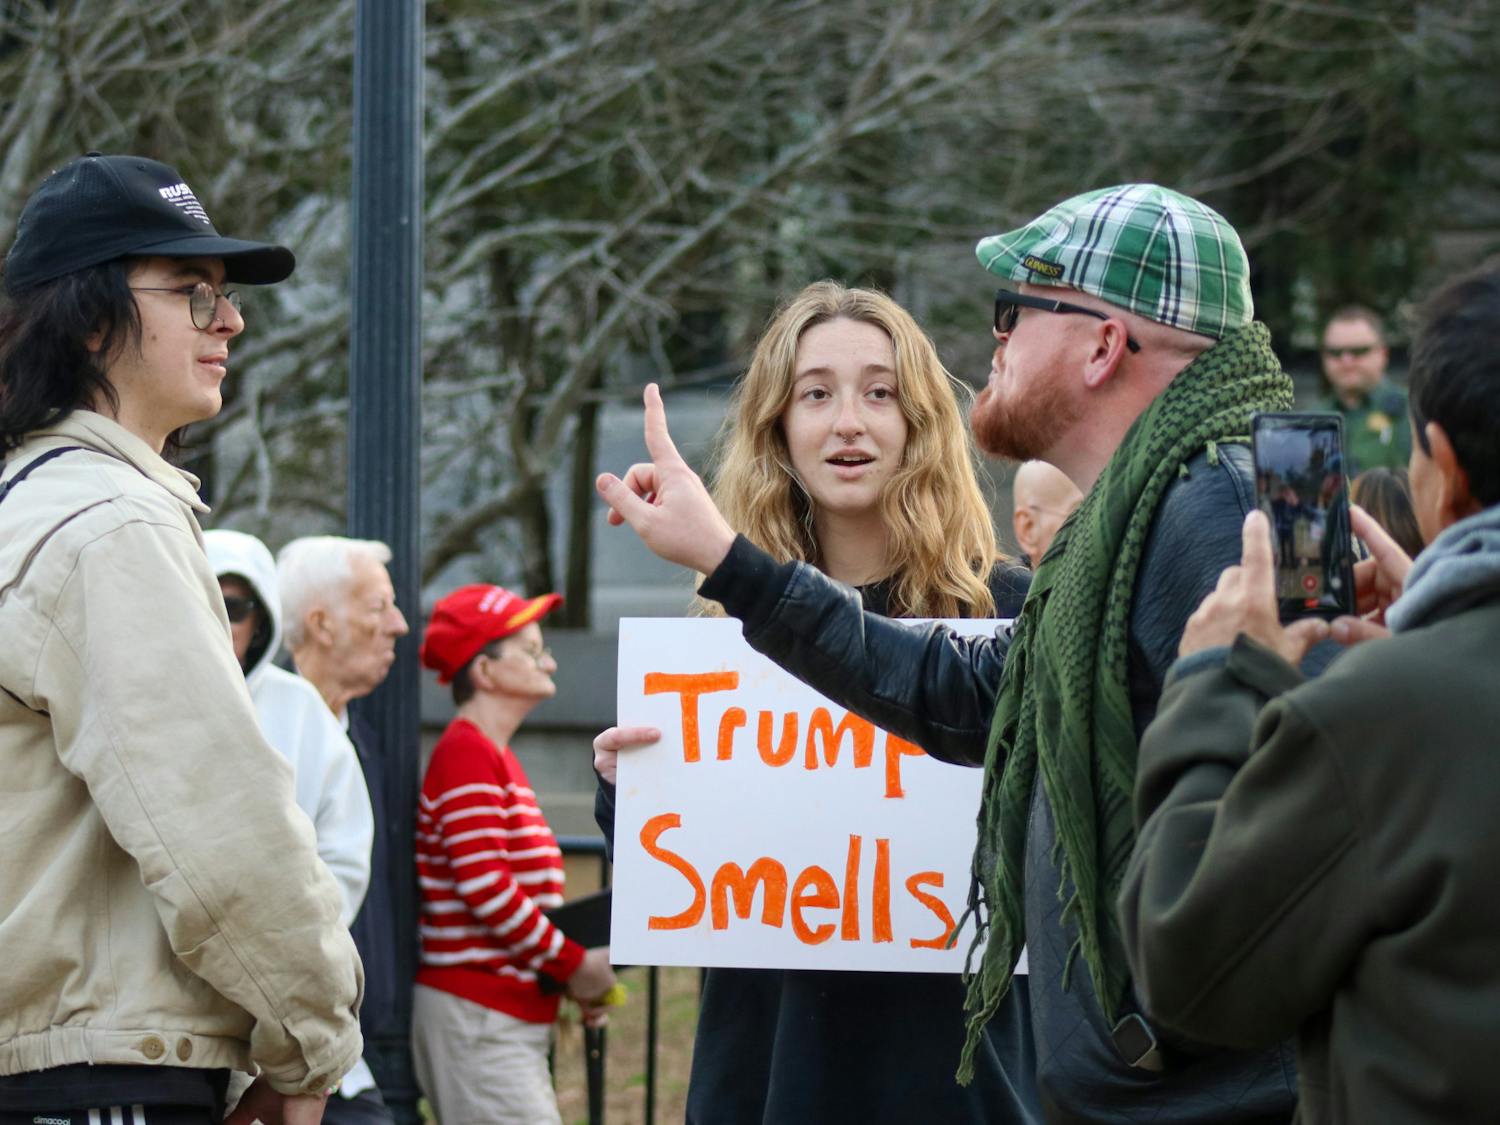 JT Bessinger (right) yells at counter protestors in one of the few conflicts on the Statehouse lawn on Jan. 28, 2023. "You have hijacked the gay community," he said as he continued to express his views to a very supportive, surrounding crowd. The protestors photographed the only to actively mix in the larger group of Trump supporters.&nbsp;